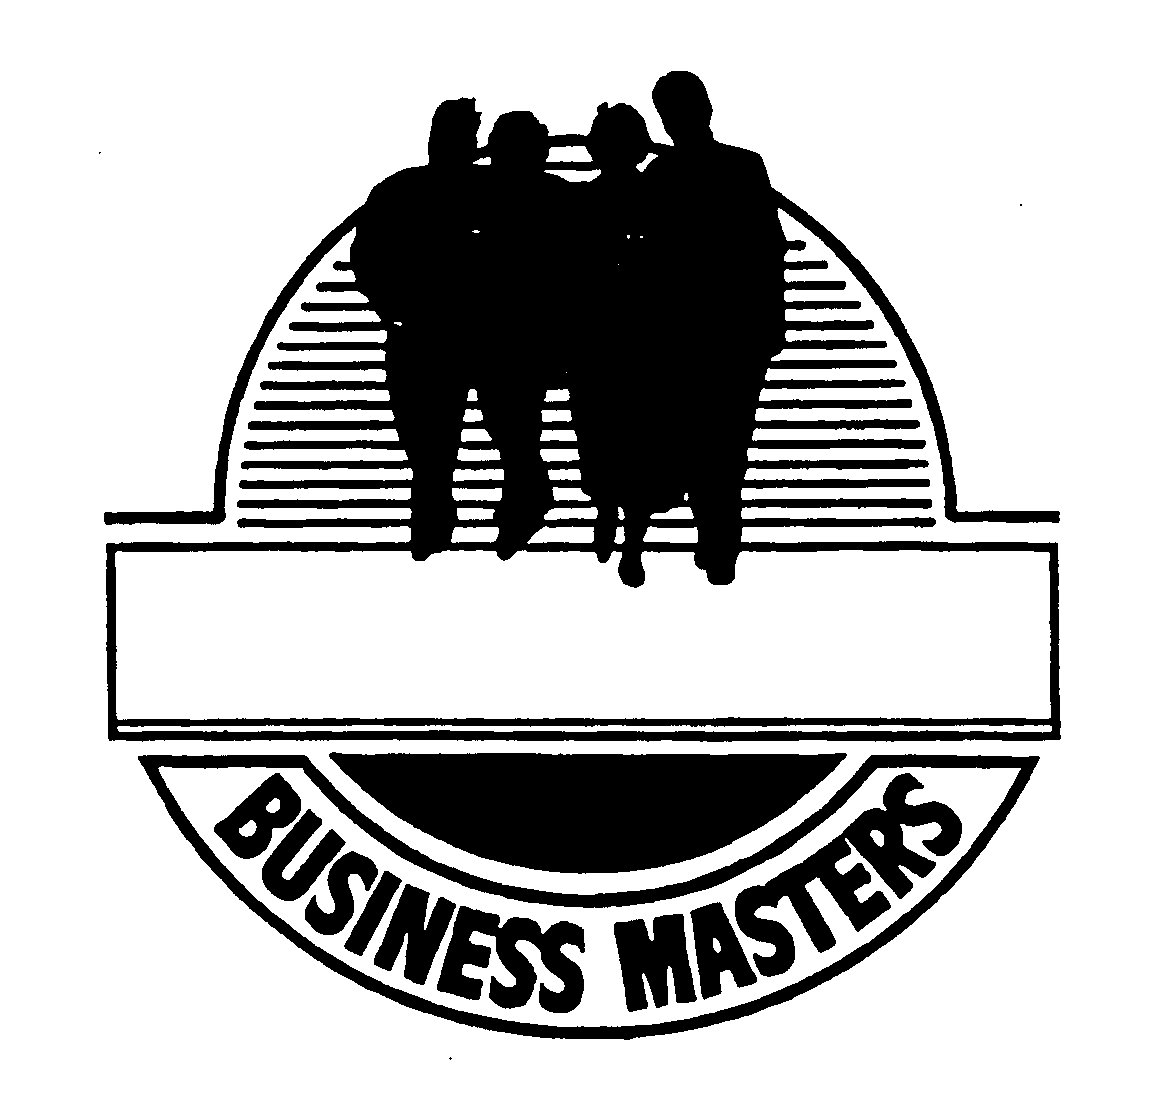  BUSINESS MASTERS